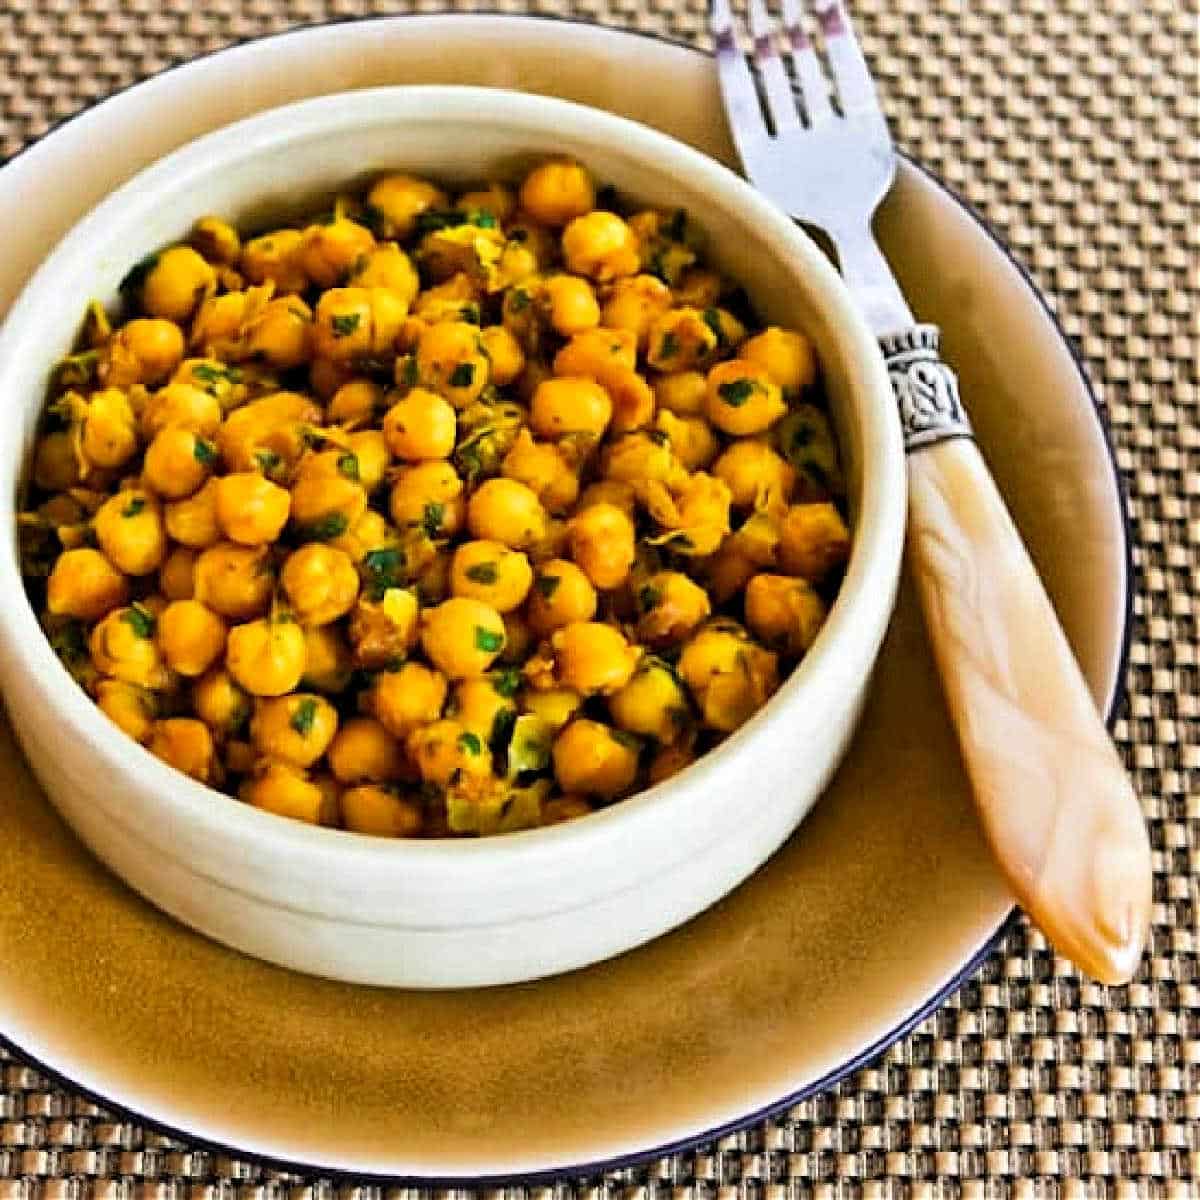 Square image for Curried Chickpea Salad shown in bowl with plate and fork.